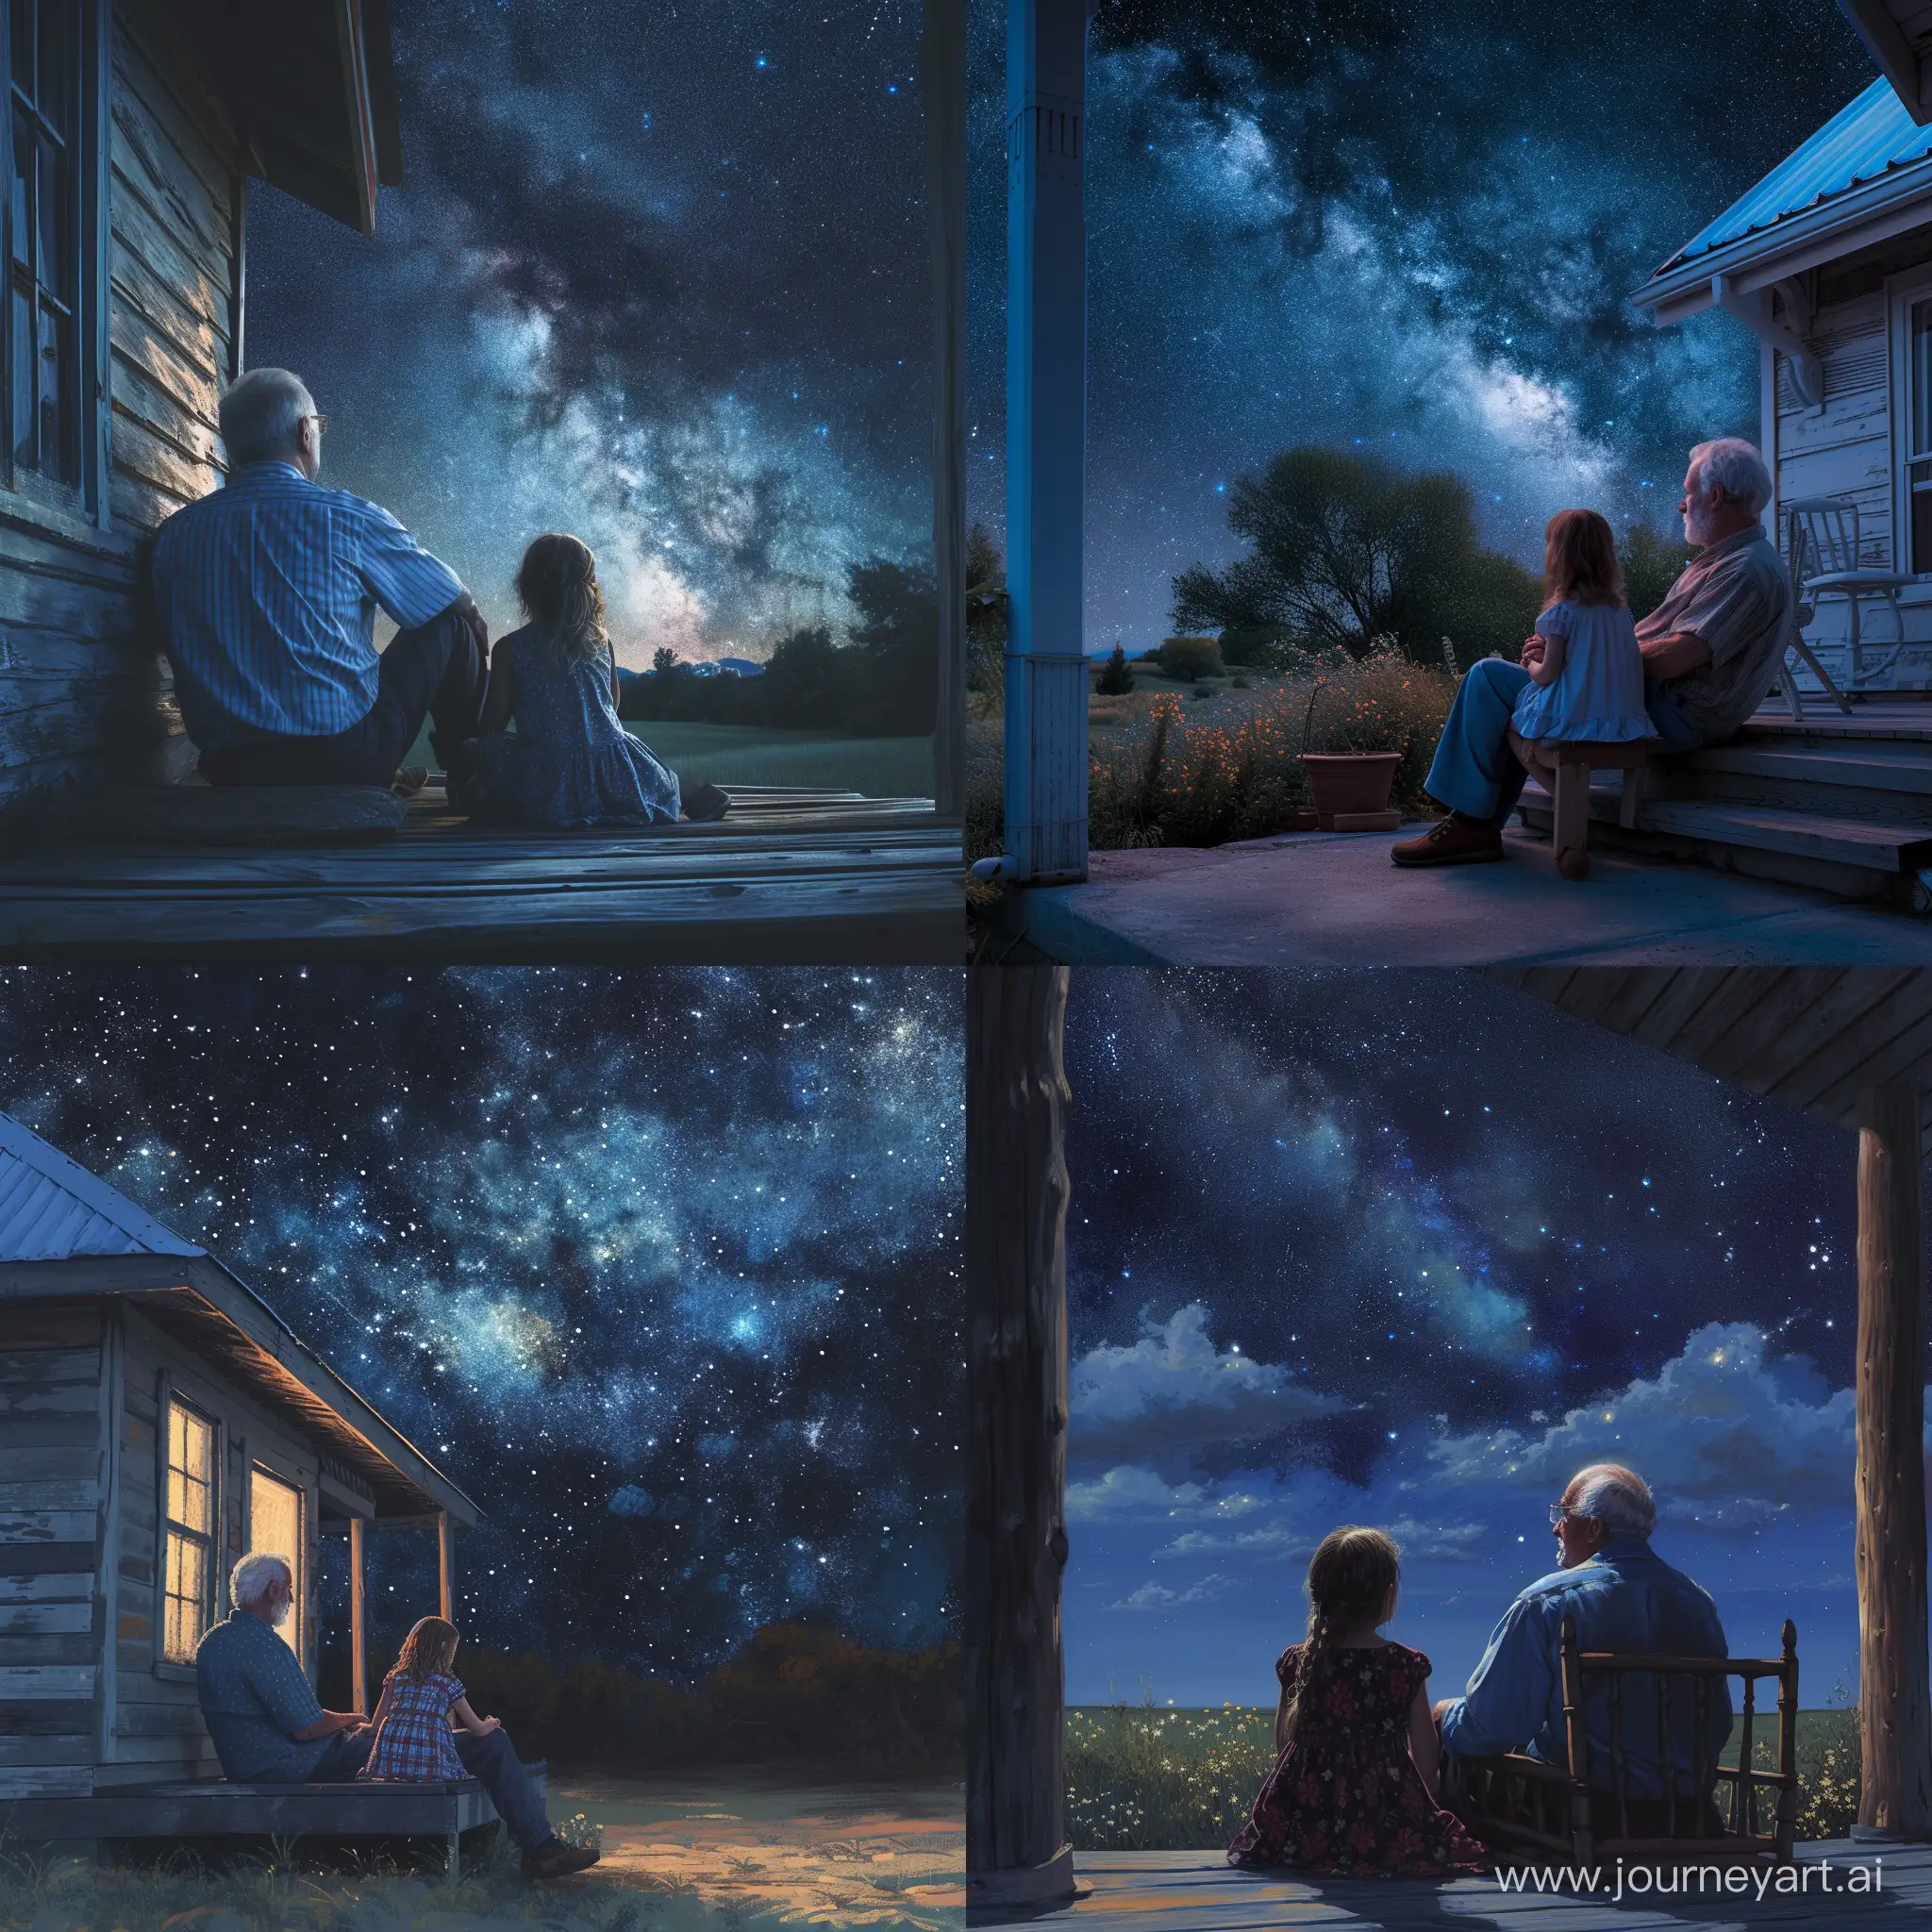 Grandfather-and-Granddaughter-Enjoying-Starry-Night-on-Porch